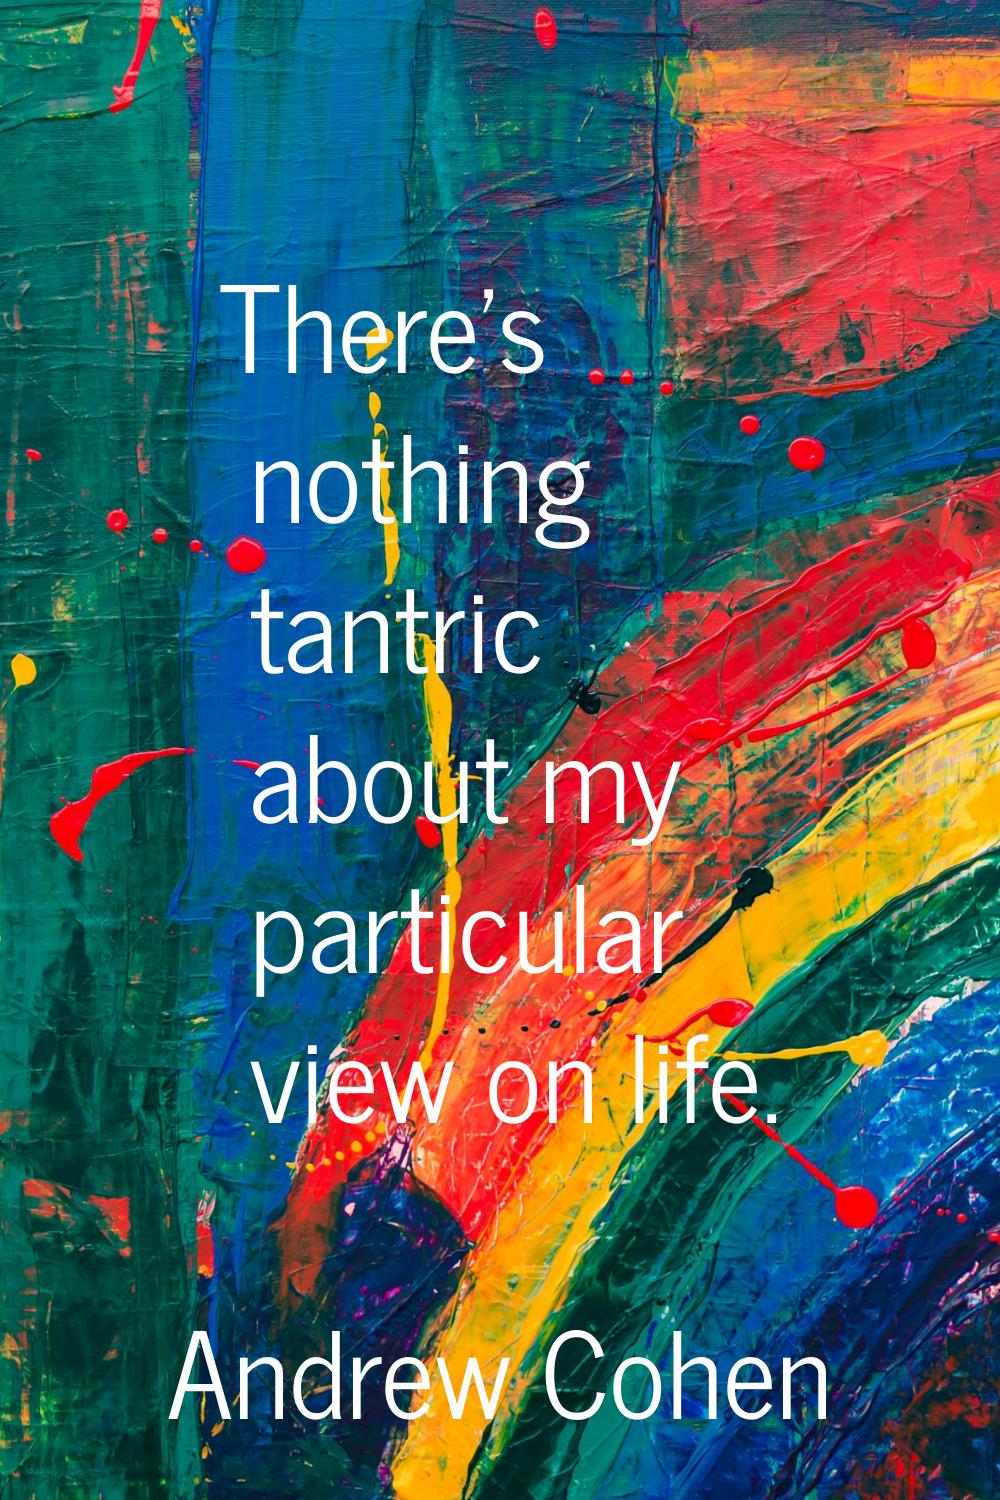 There's nothing tantric about my particular view on life.